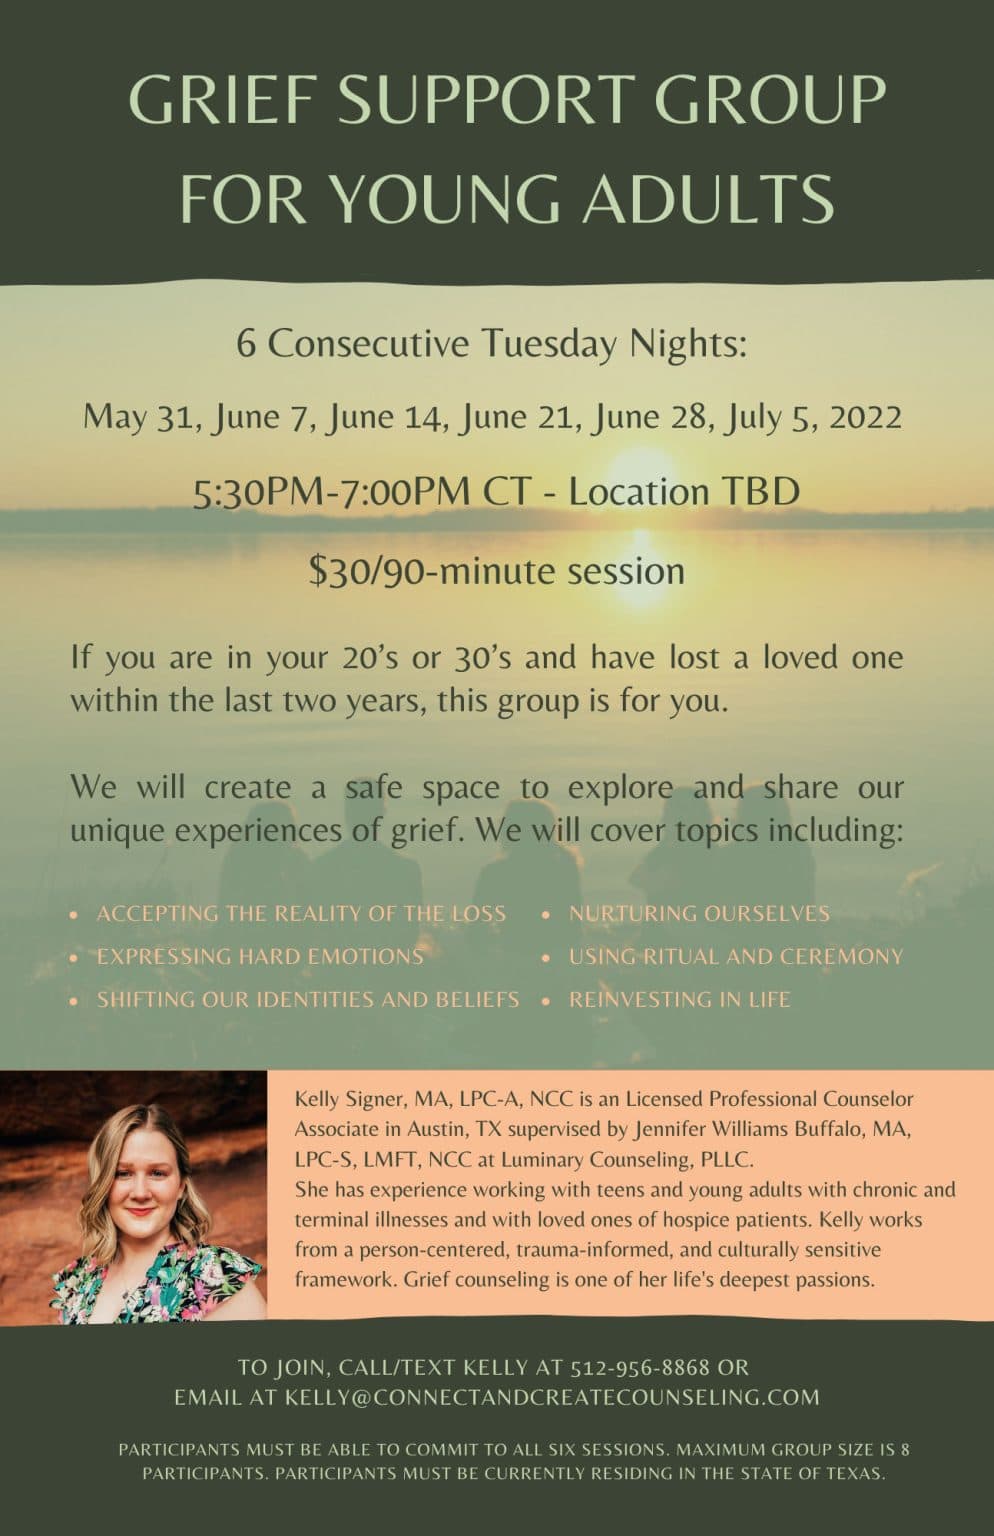 Grief Support Group flyer